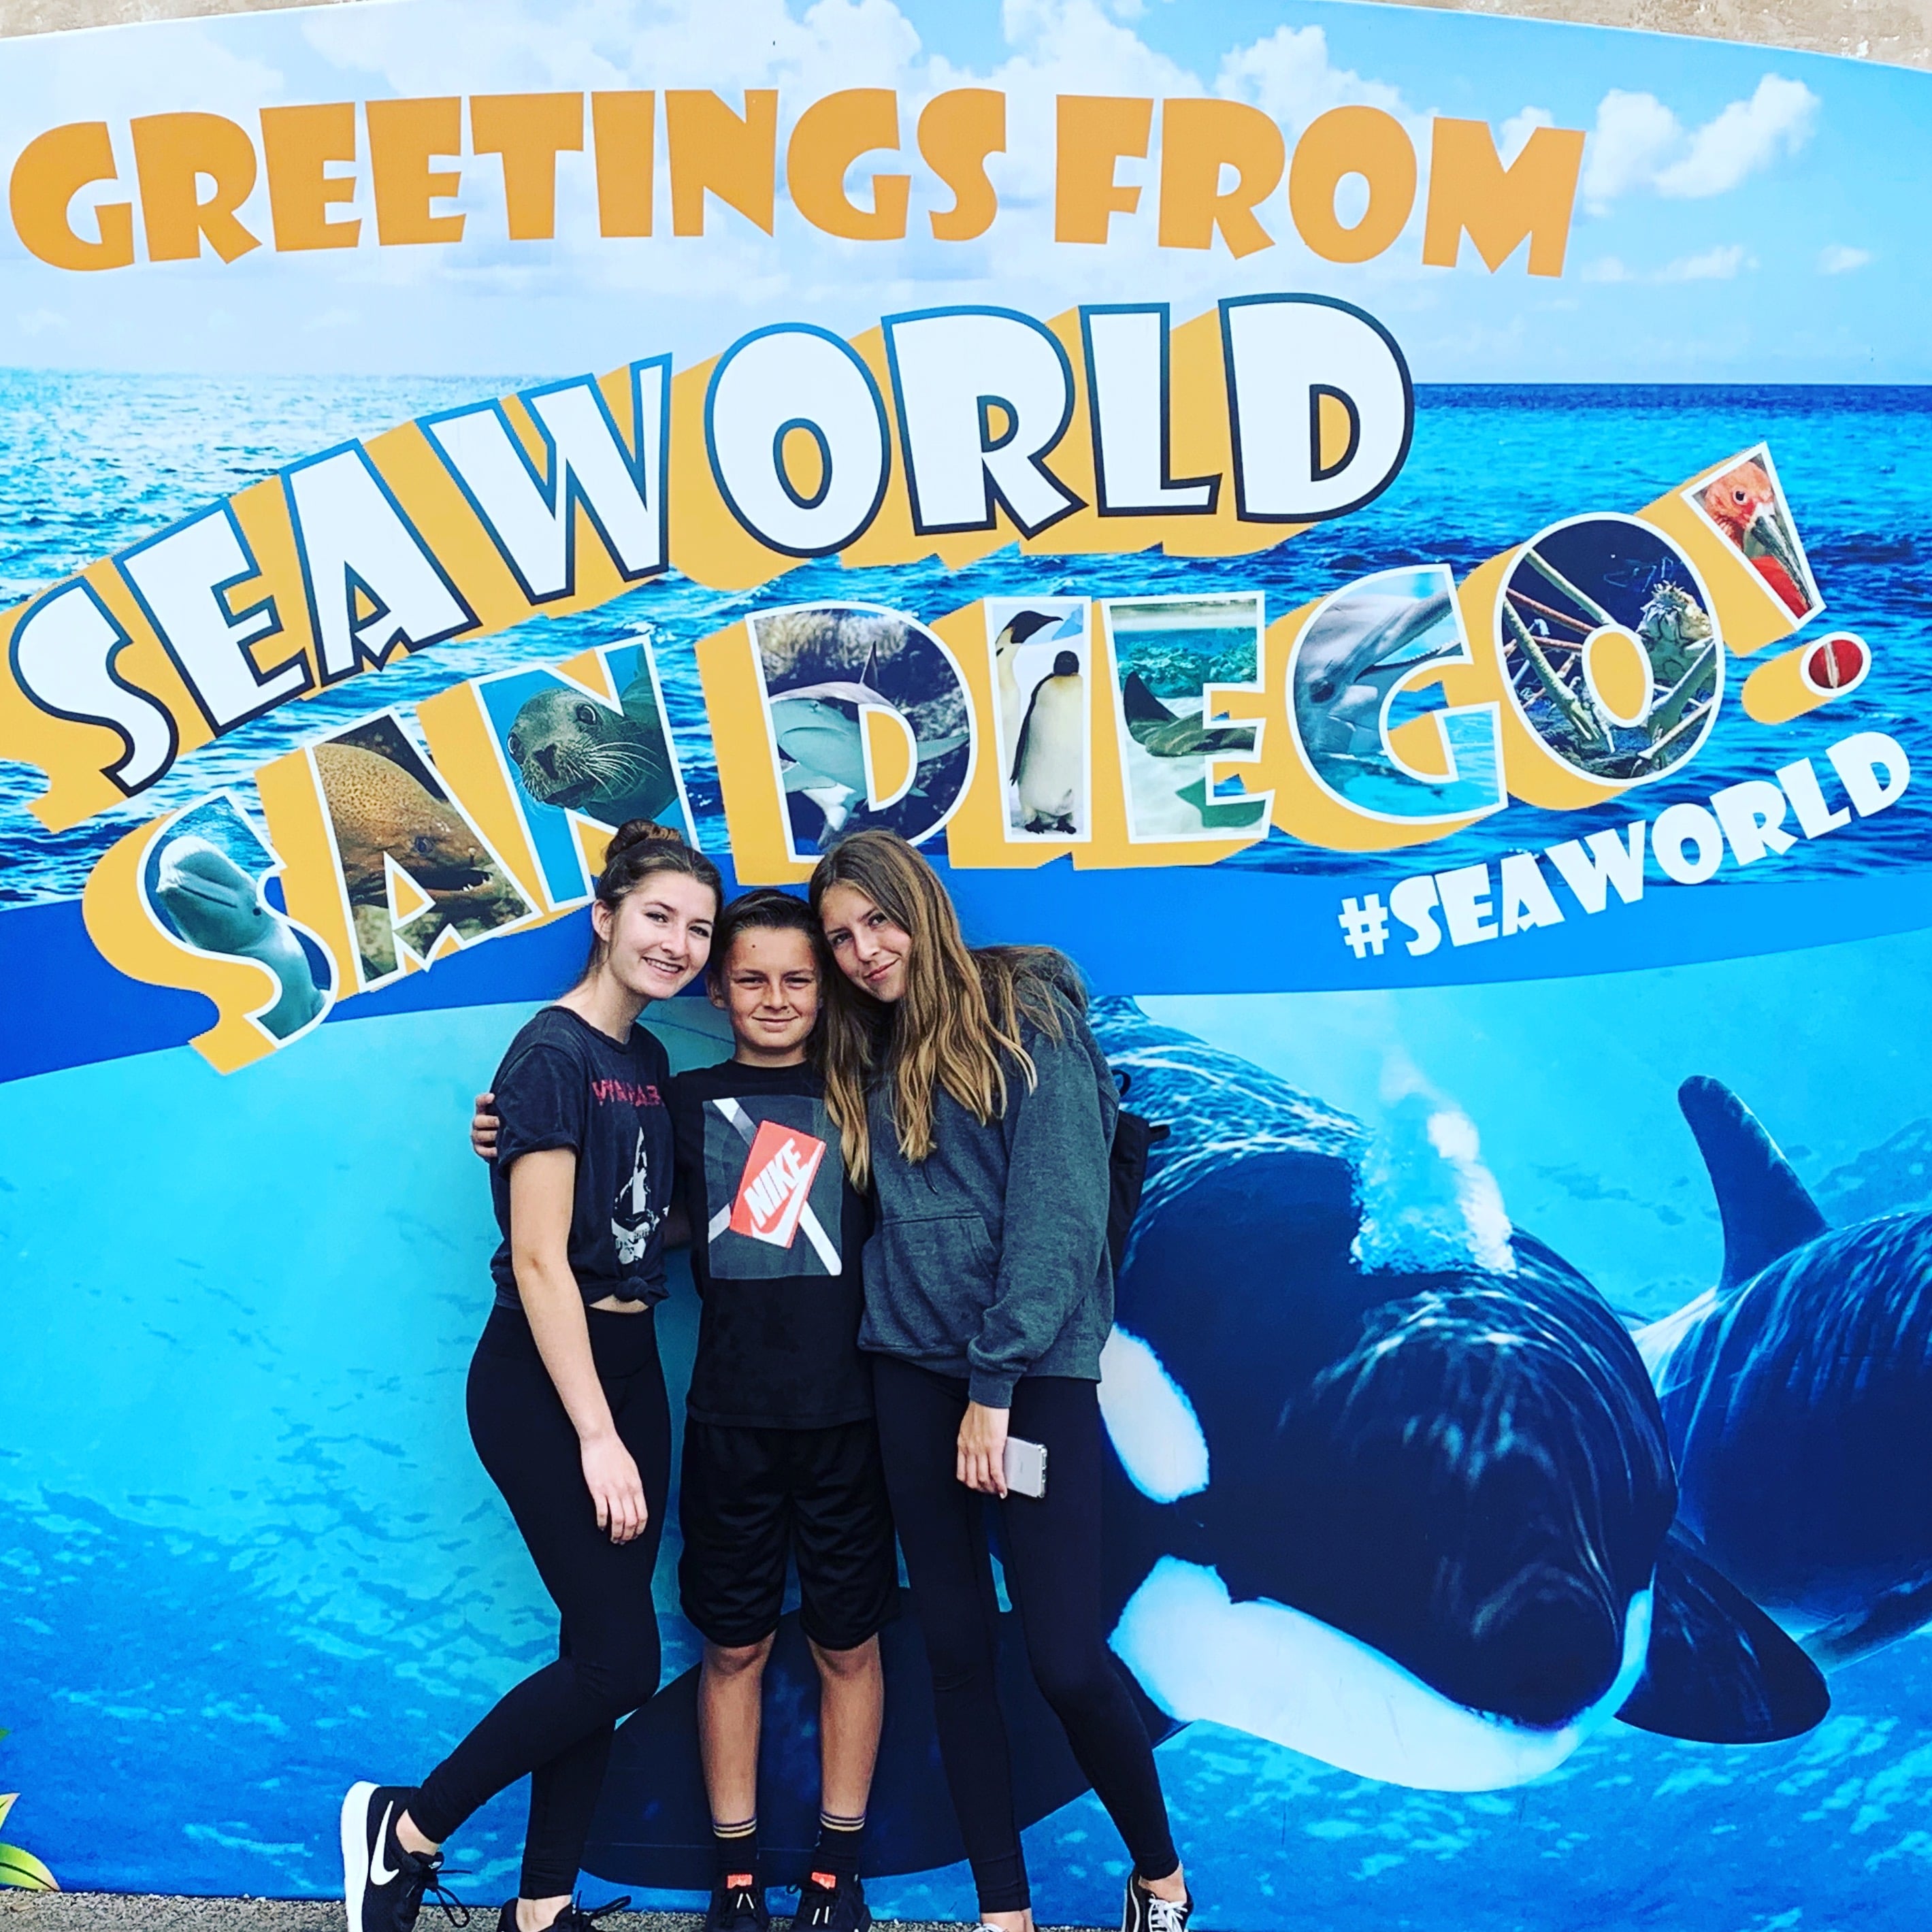 Kids posing in front of Sea World San Diego Sign